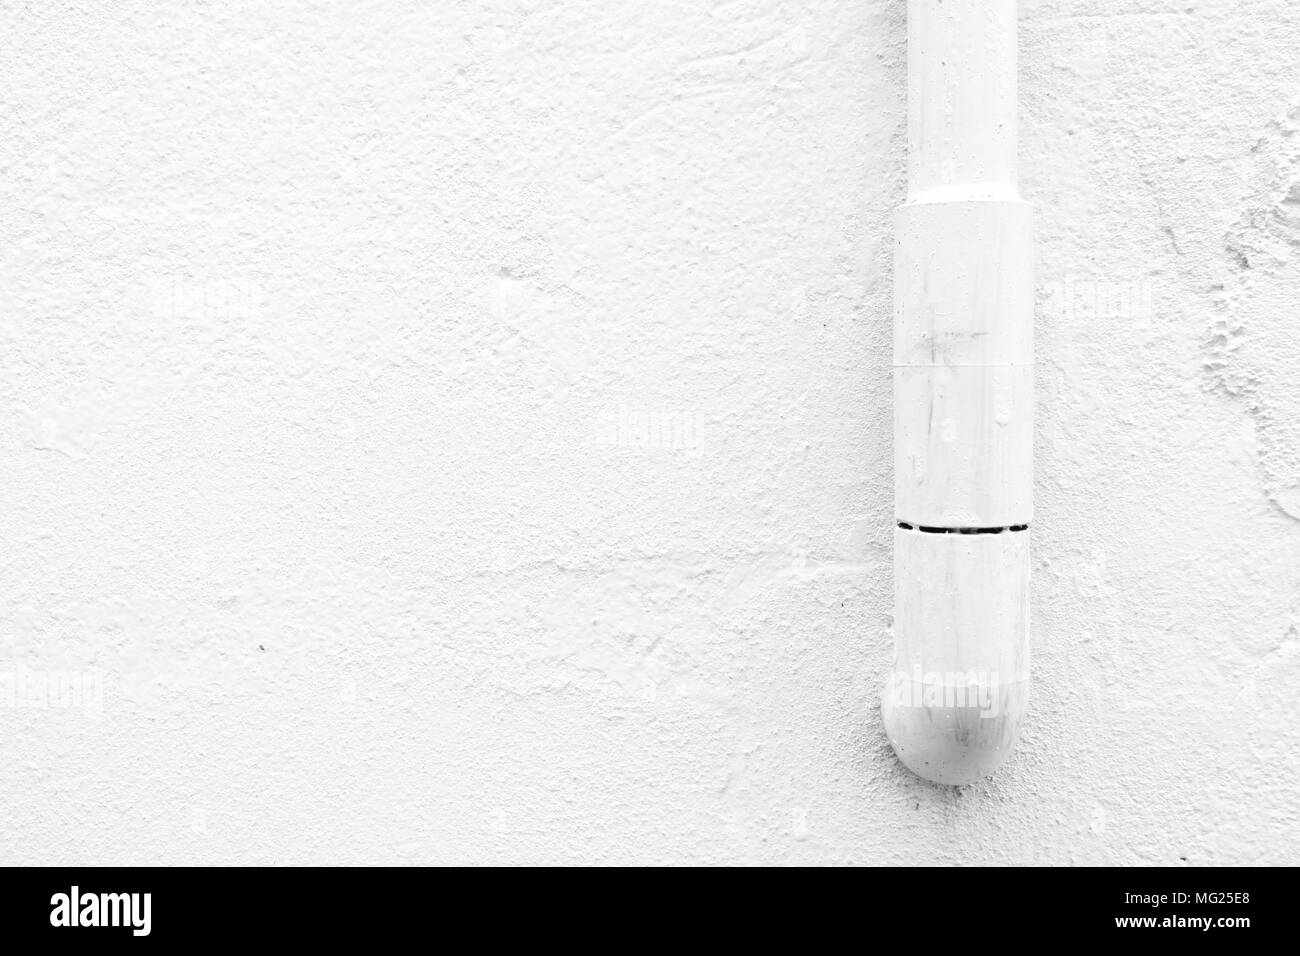 Water Pipe on White Grunge Concrete Wall Background with Space for Text. Stock Photo